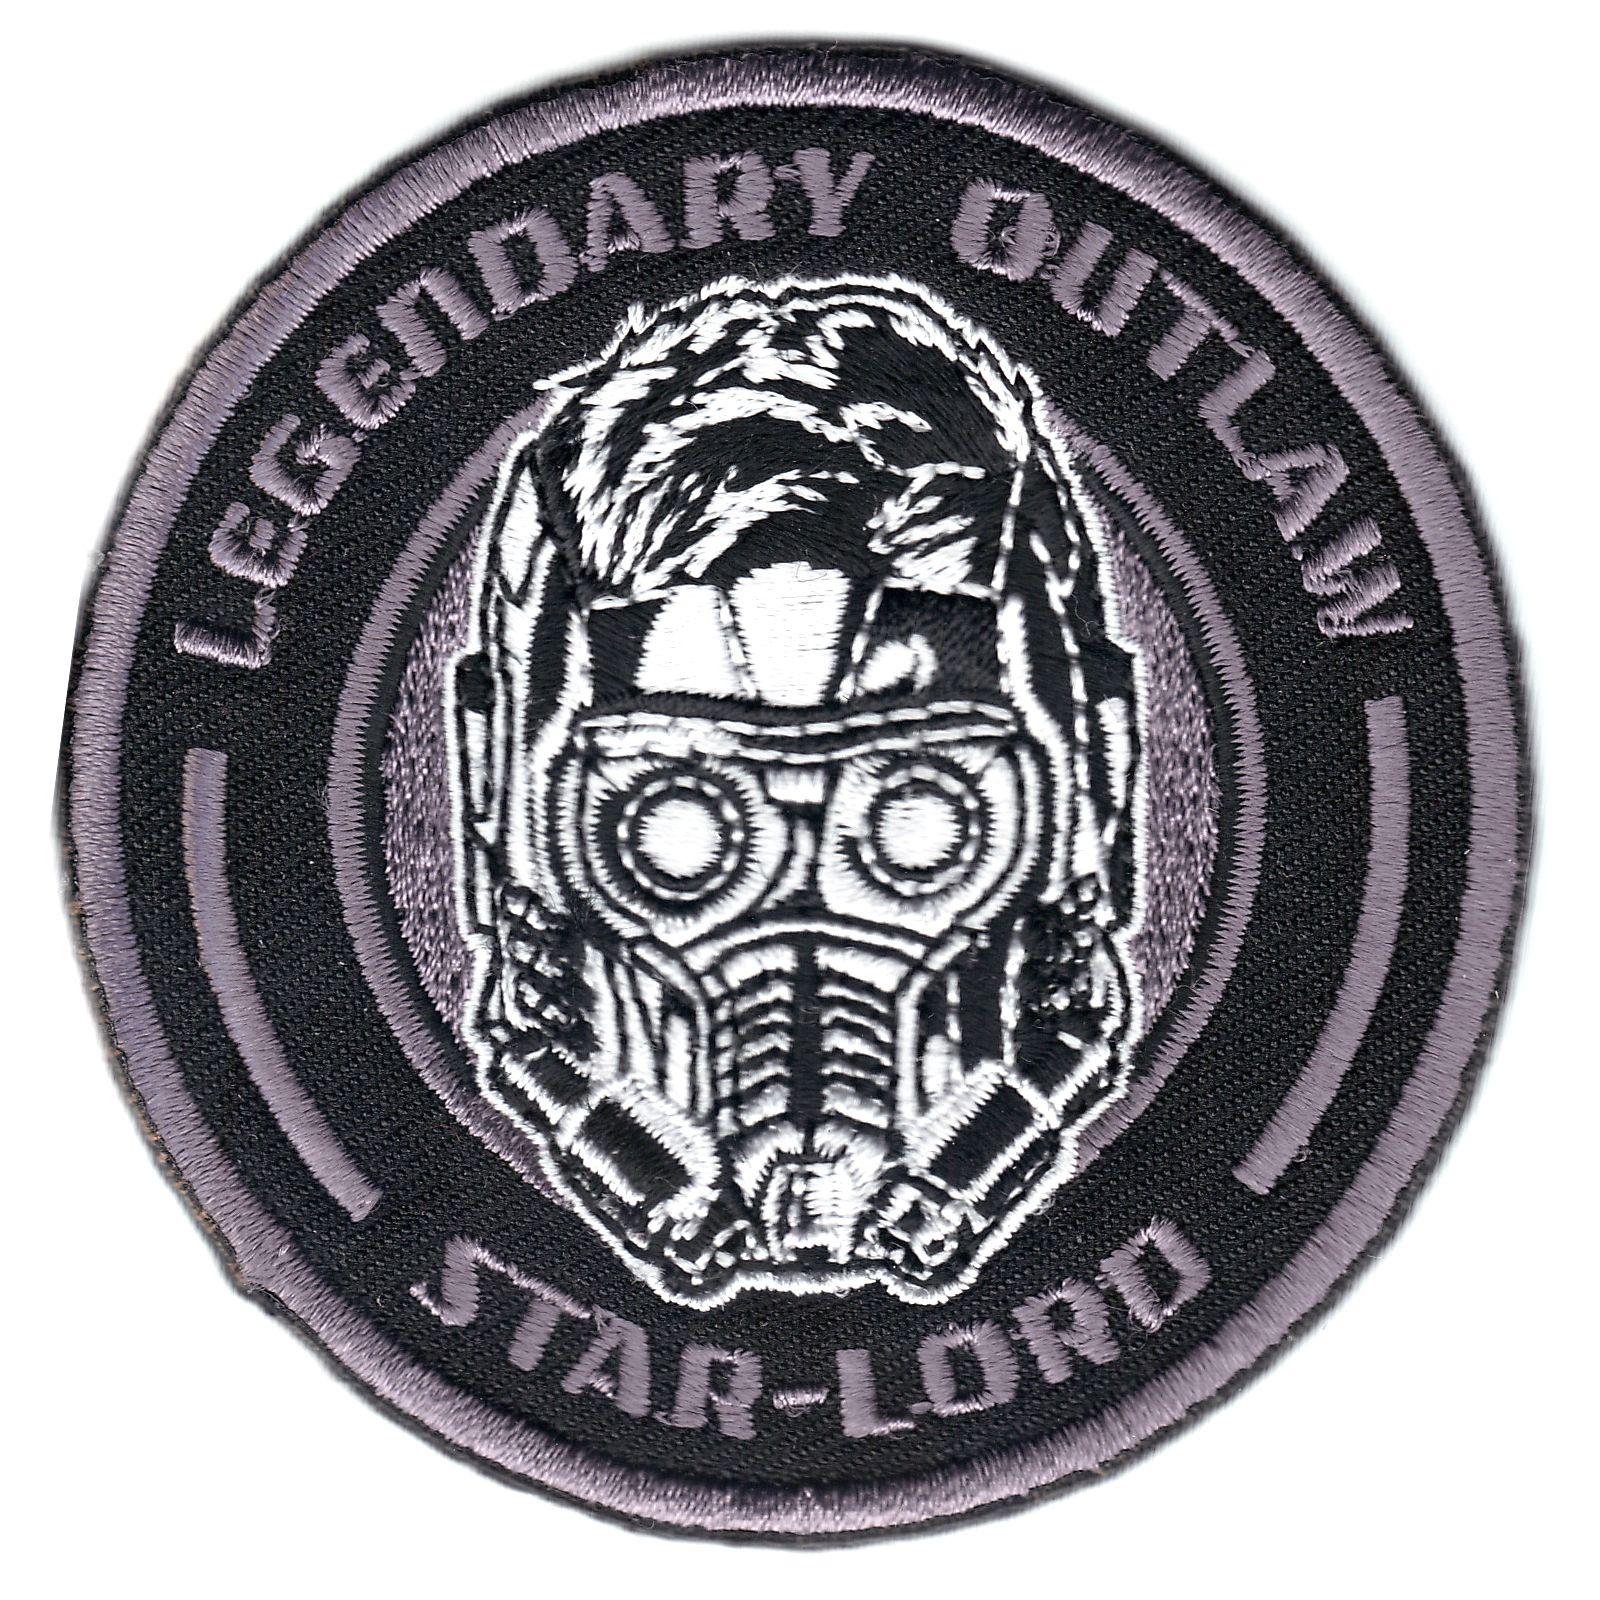 Star-Lord Logo - Details about Marvel Guardians of the Galaxy Star Lord Iron on Applique  Superhero Patch